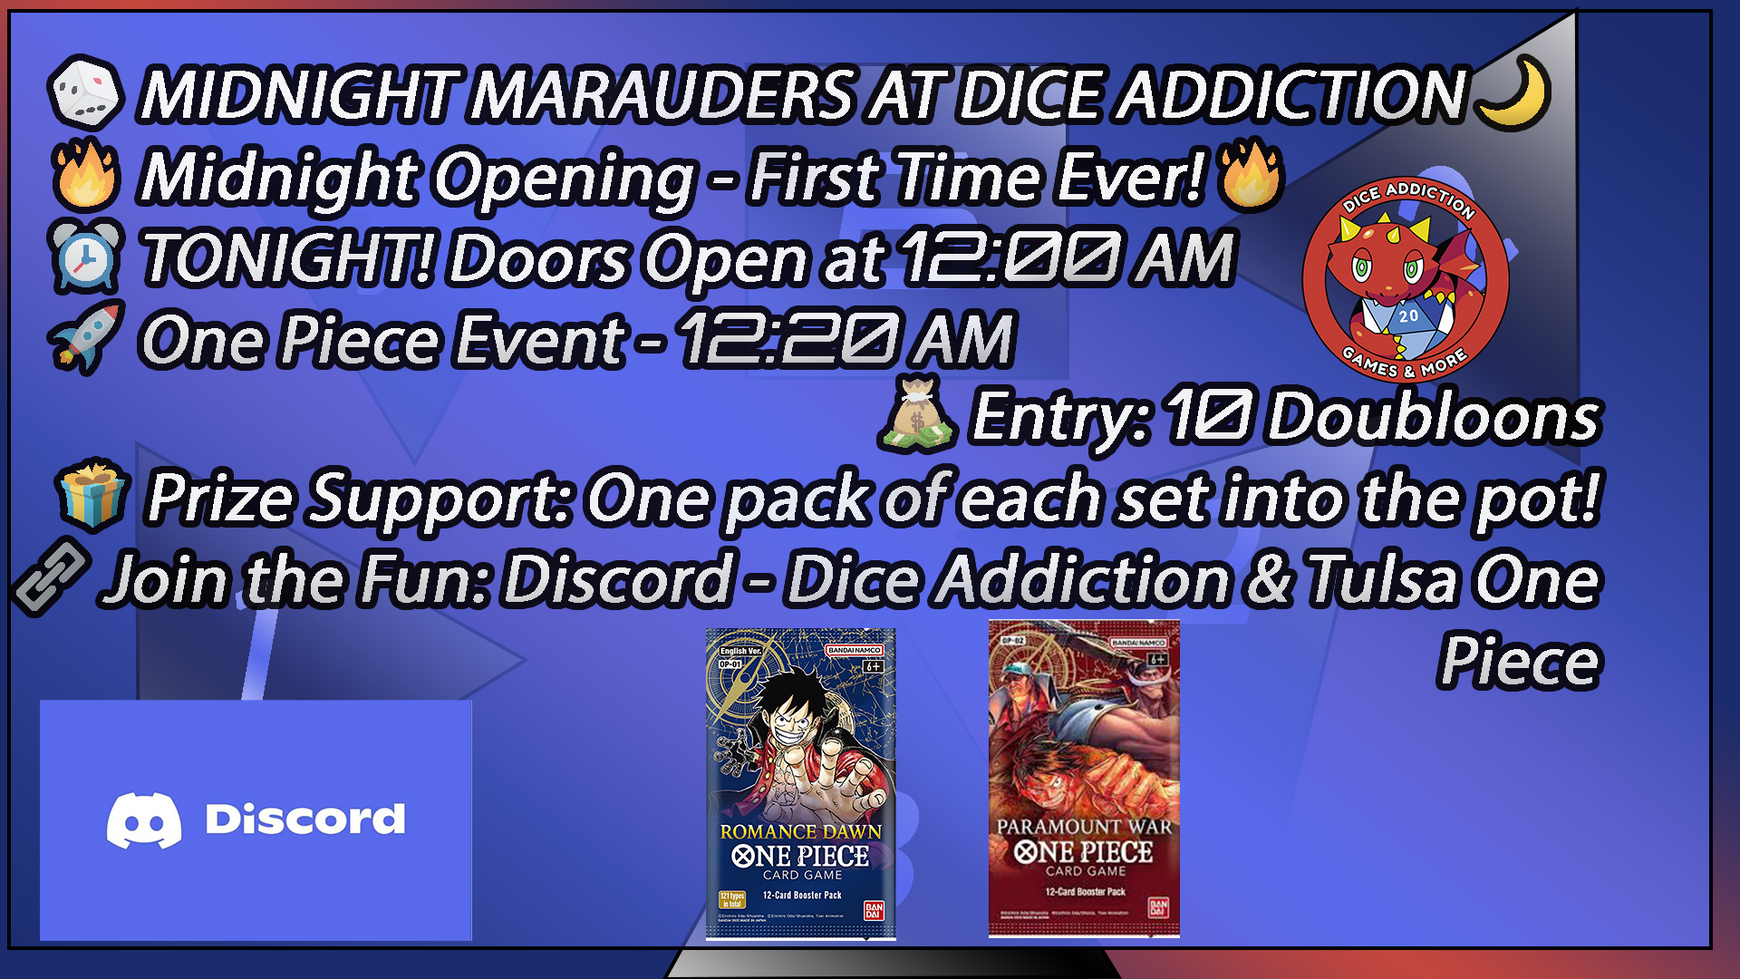 Roll into Midnight Madness at Dice Addiction with a One Piece Tournament